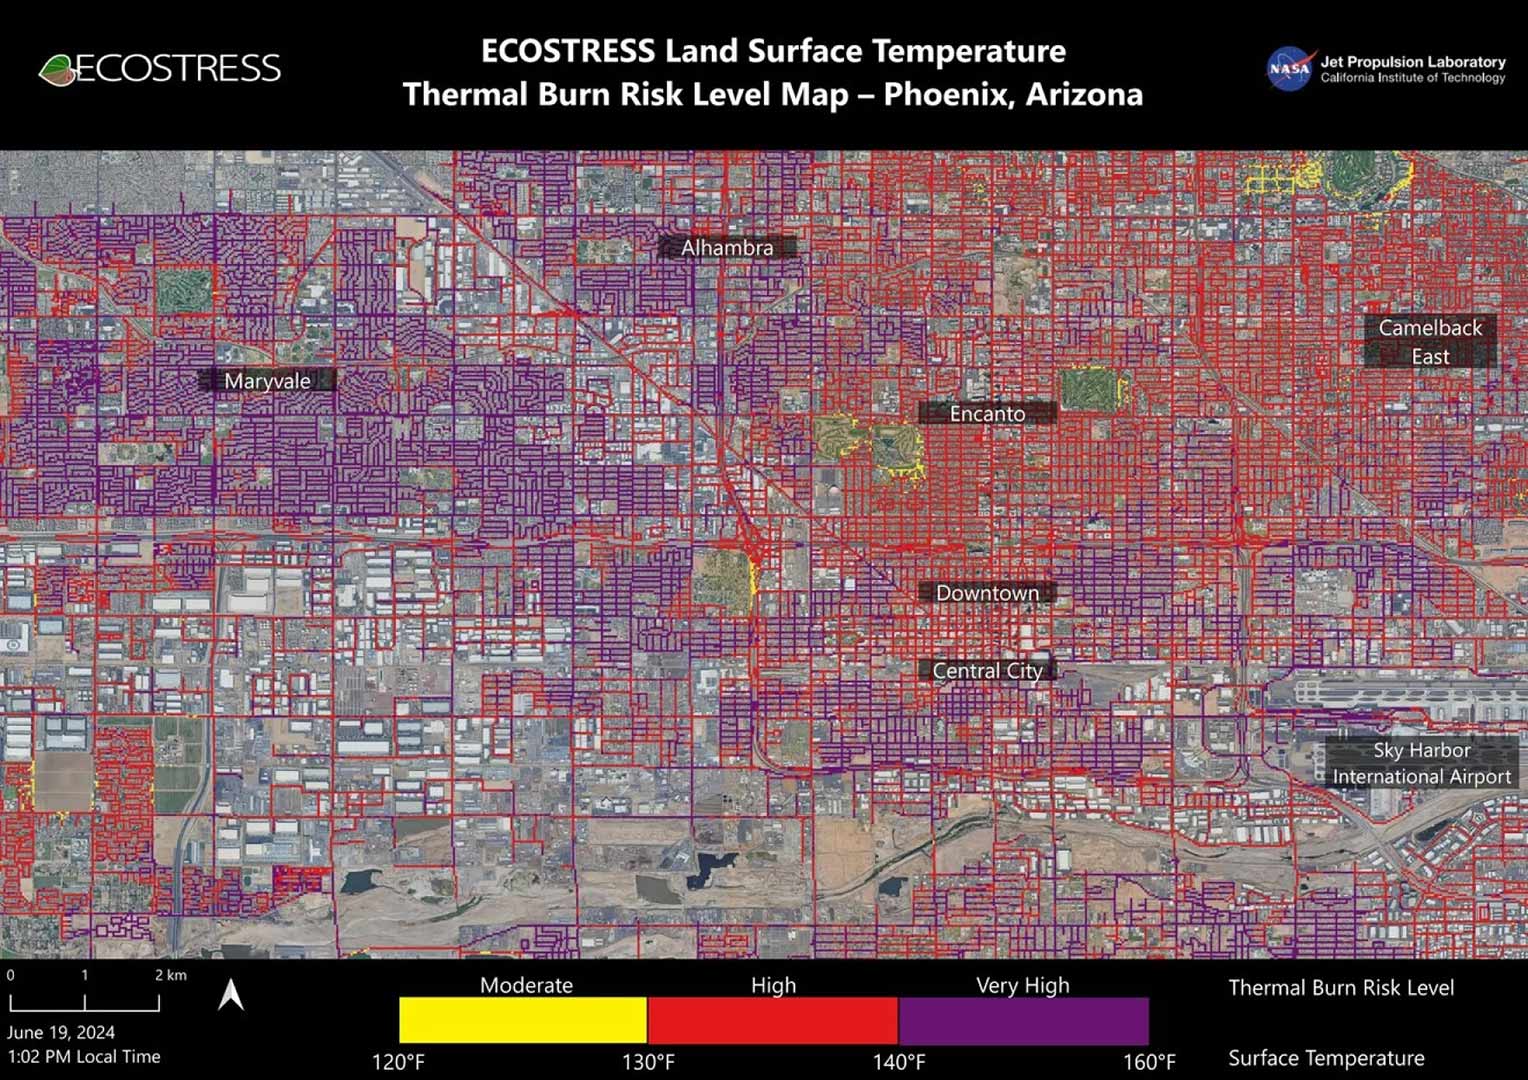 NASA’s ECOSTRESS instrument on June 19, 2024, recorded scorching roads and sidewalks across Phoenix where contact with skin could cause serious burns in minutes to seconds, as indicated in the legend.